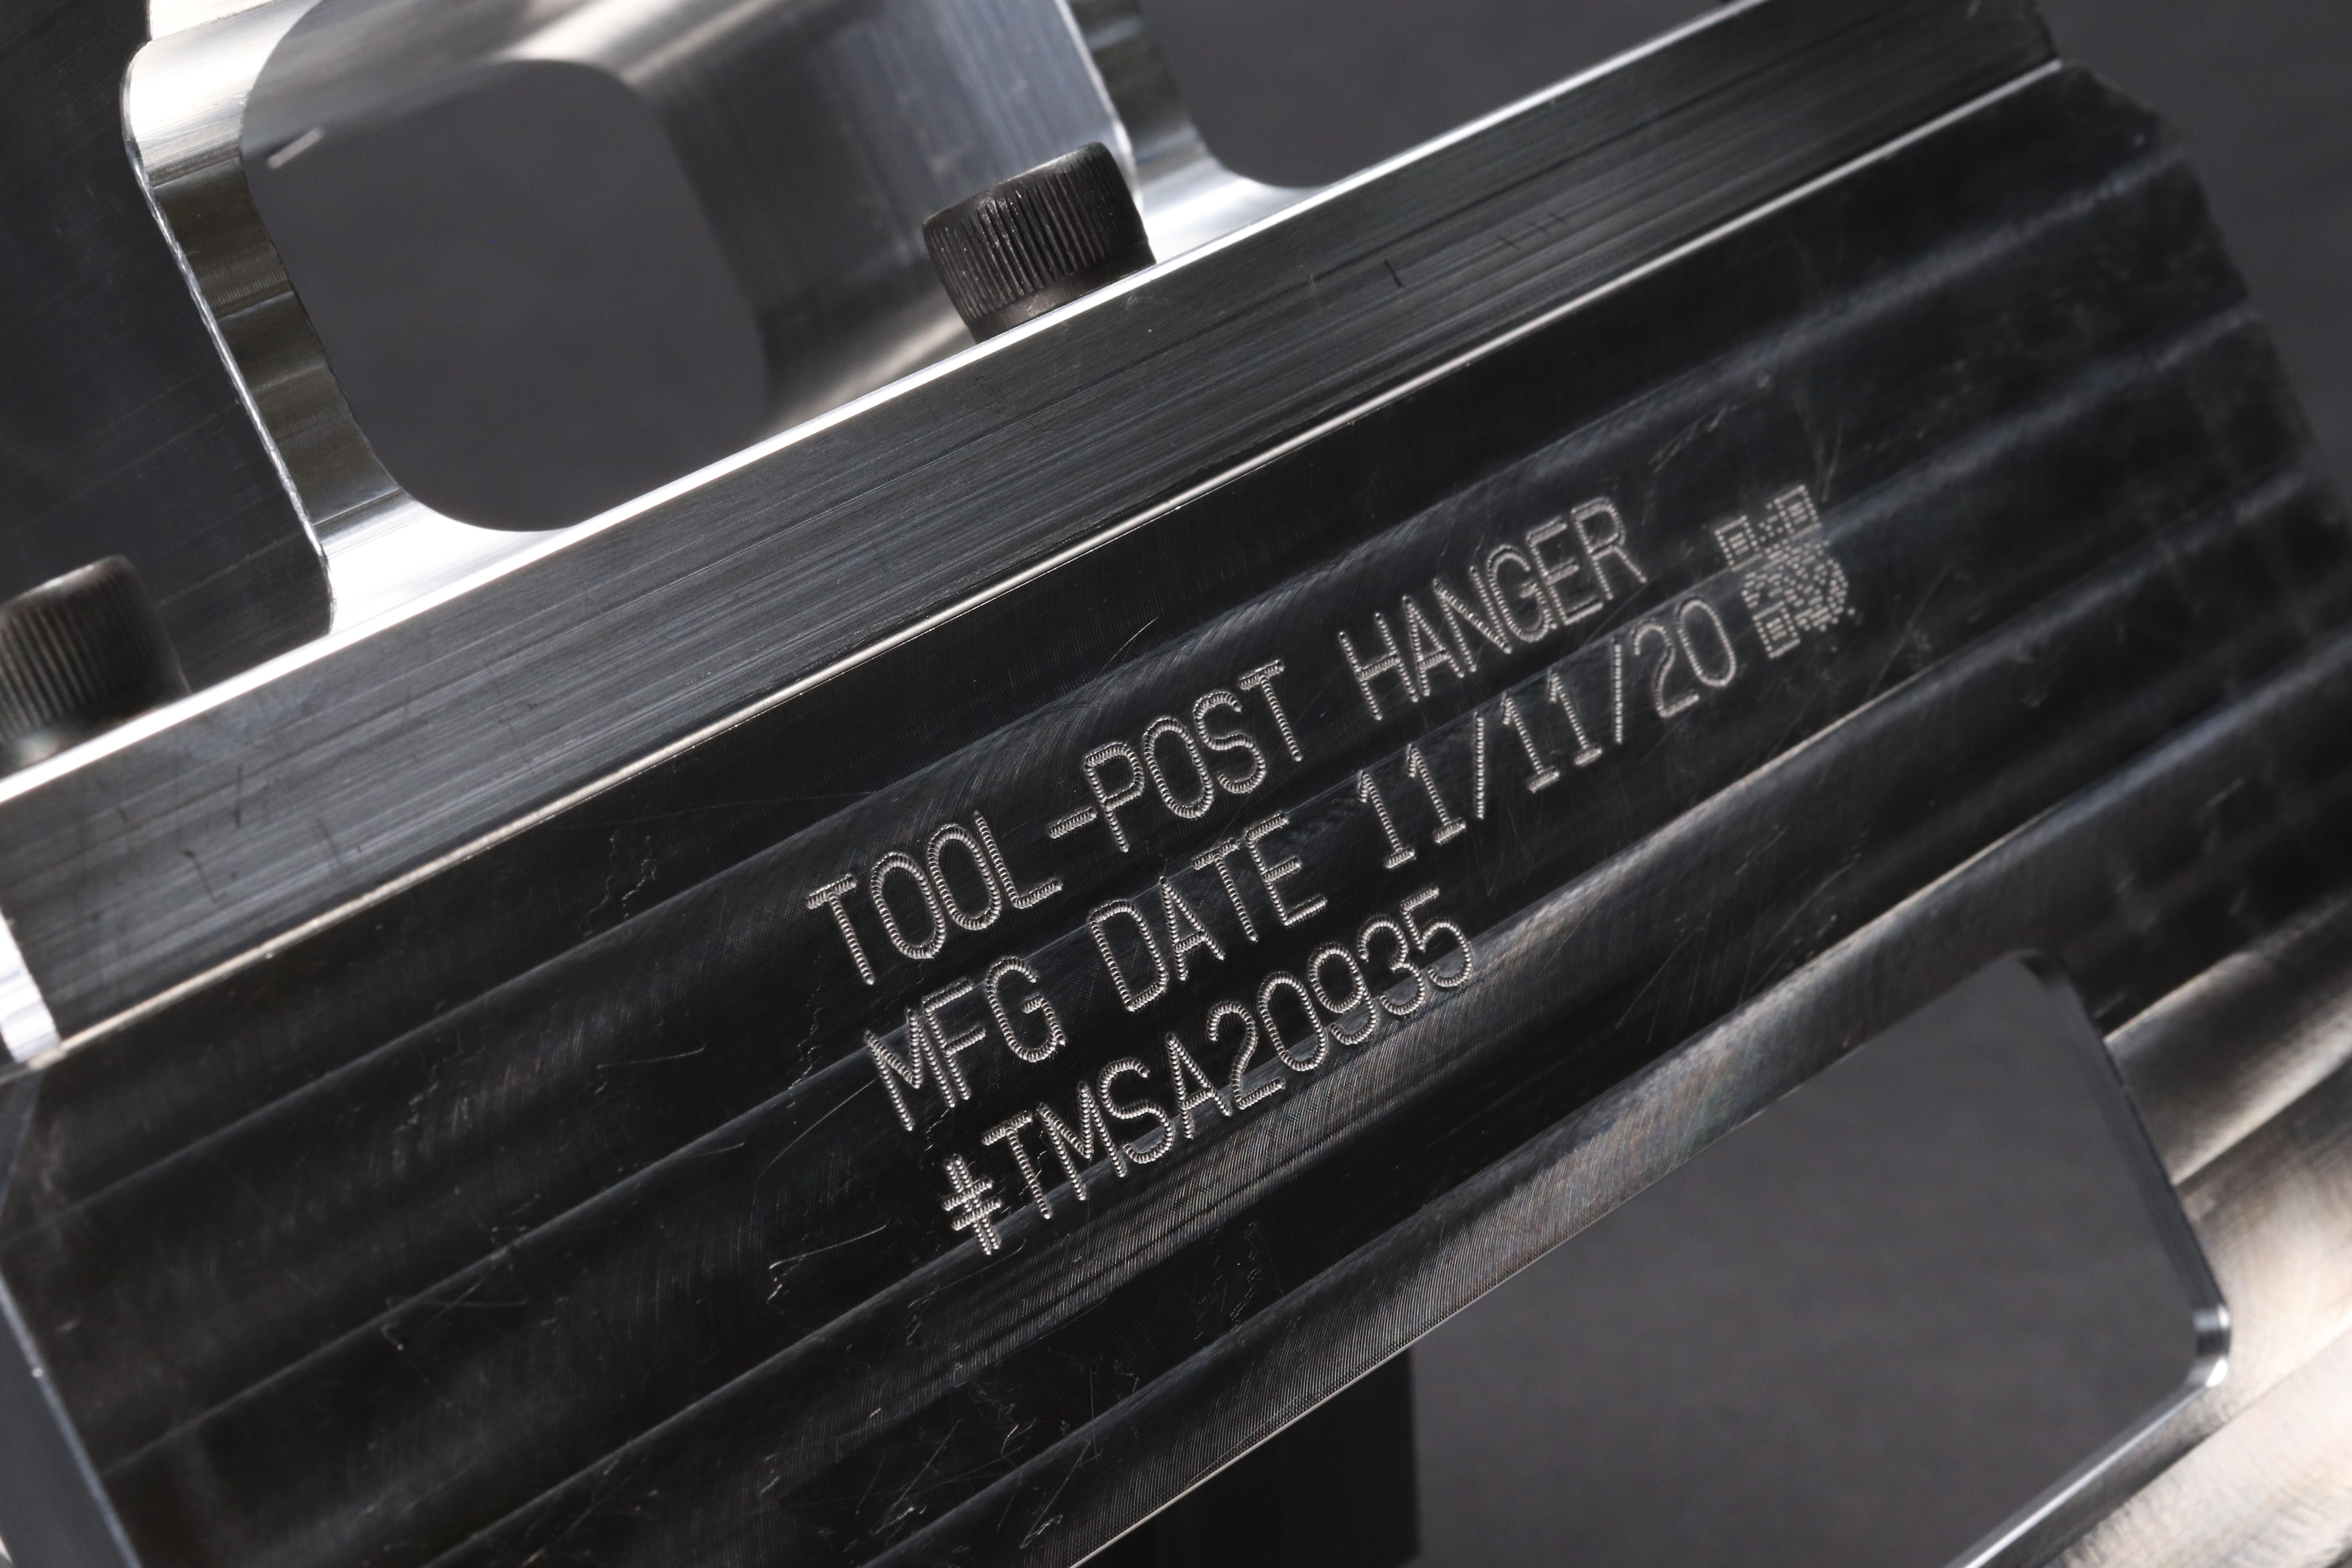 Image of an aluminum fixture engraved with text, numbers and a QR code that reads 'TOOL-POST HANGER MFG DATE 11/11/20 #TMSA20935'.